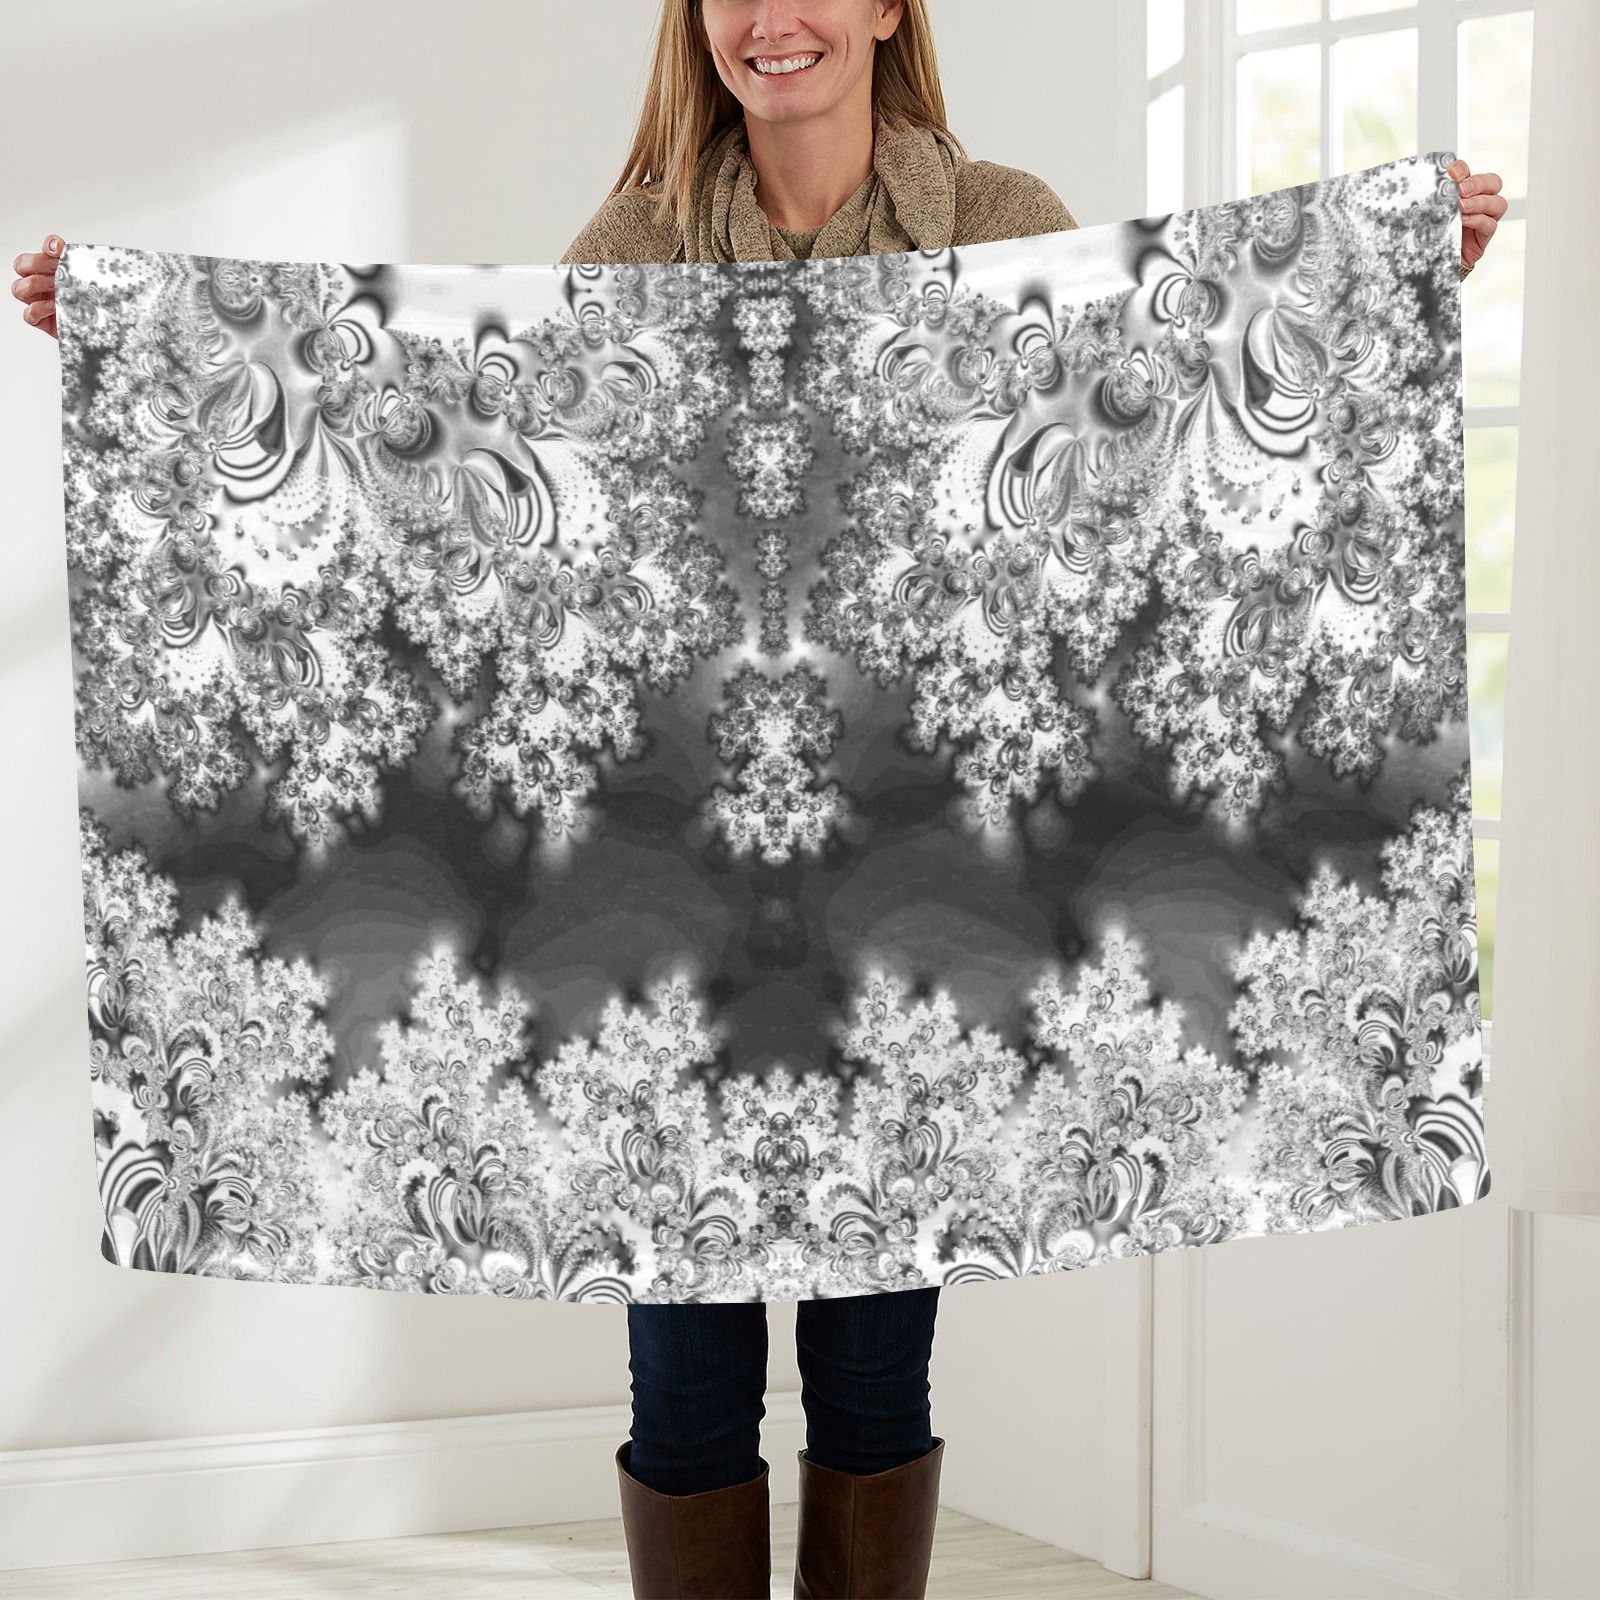 Silver Linings Frost Fractal Baby Blanket 40"x50"